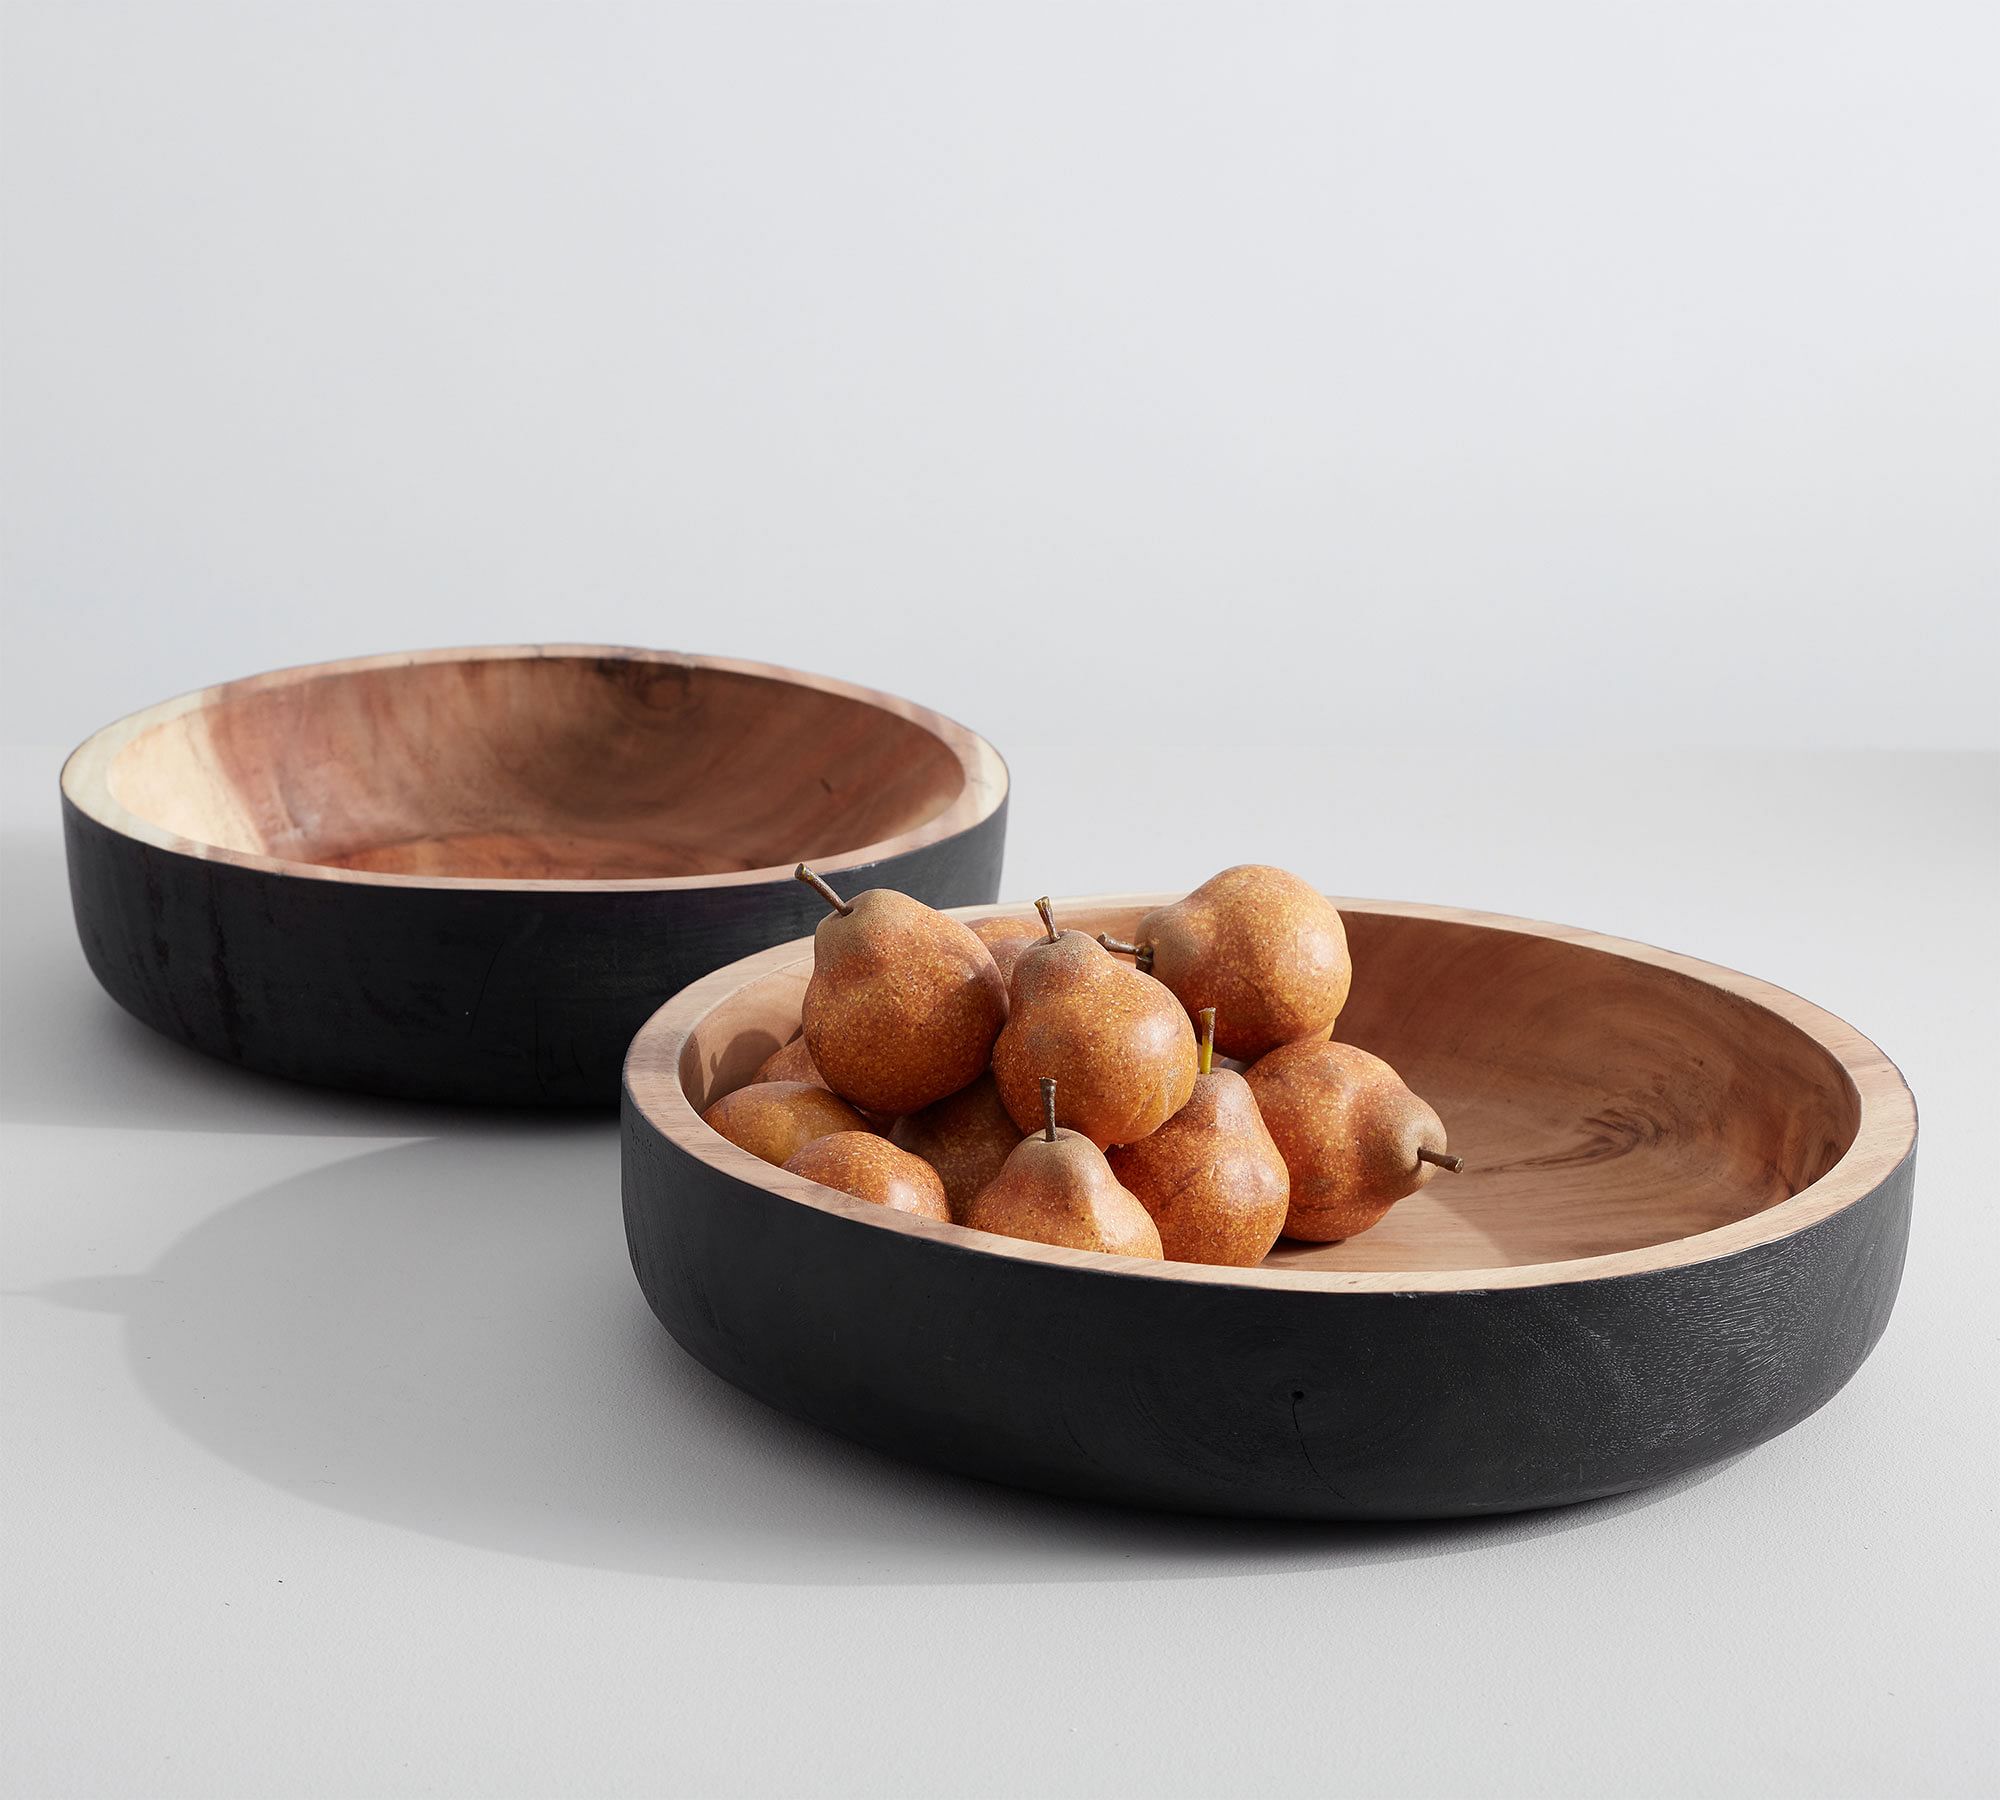 wedding registry ideas Hand Carved Wooden Trays from Pottery Barn